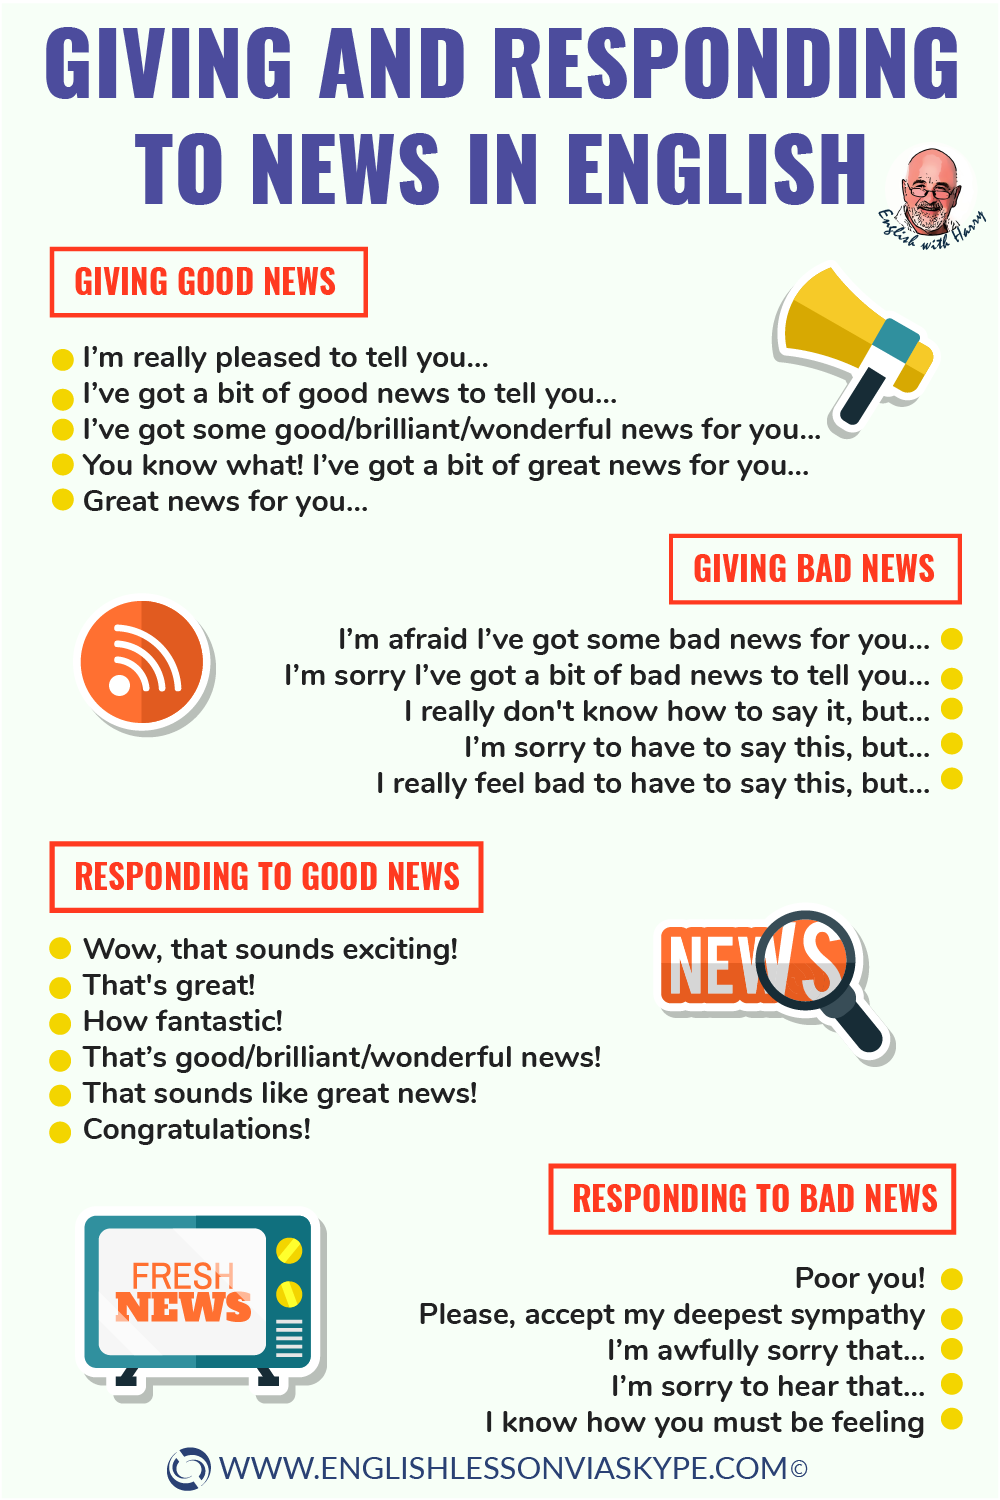 Ways to give news in English. How to give and reply to news in English? English speaking vocabulary. Advanced English learning. #learnenglish #englishlessons #englishteacher #ingles #aprenderingles #vocabulary